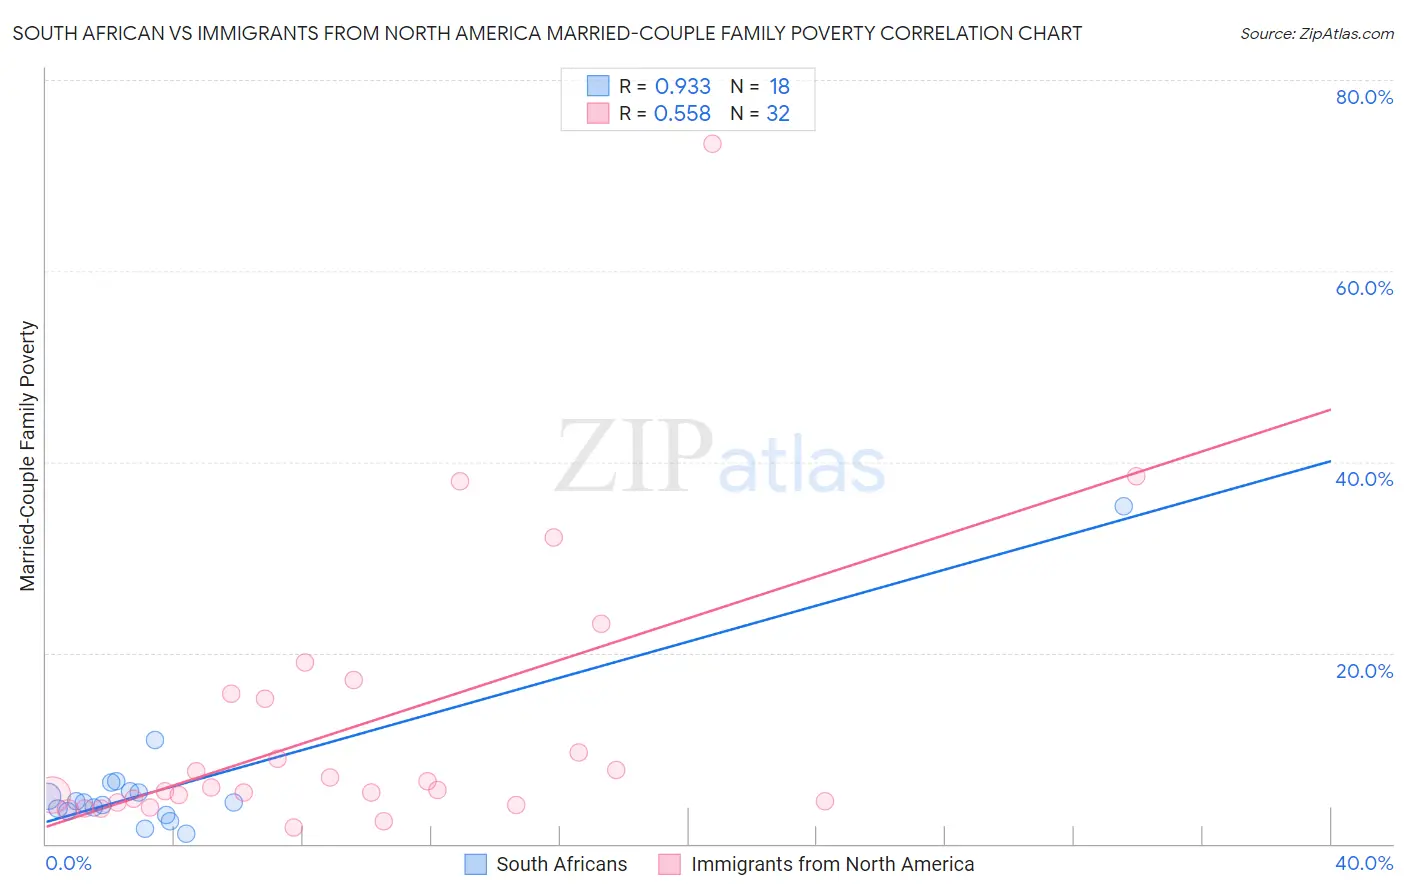 South African vs Immigrants from North America Married-Couple Family Poverty